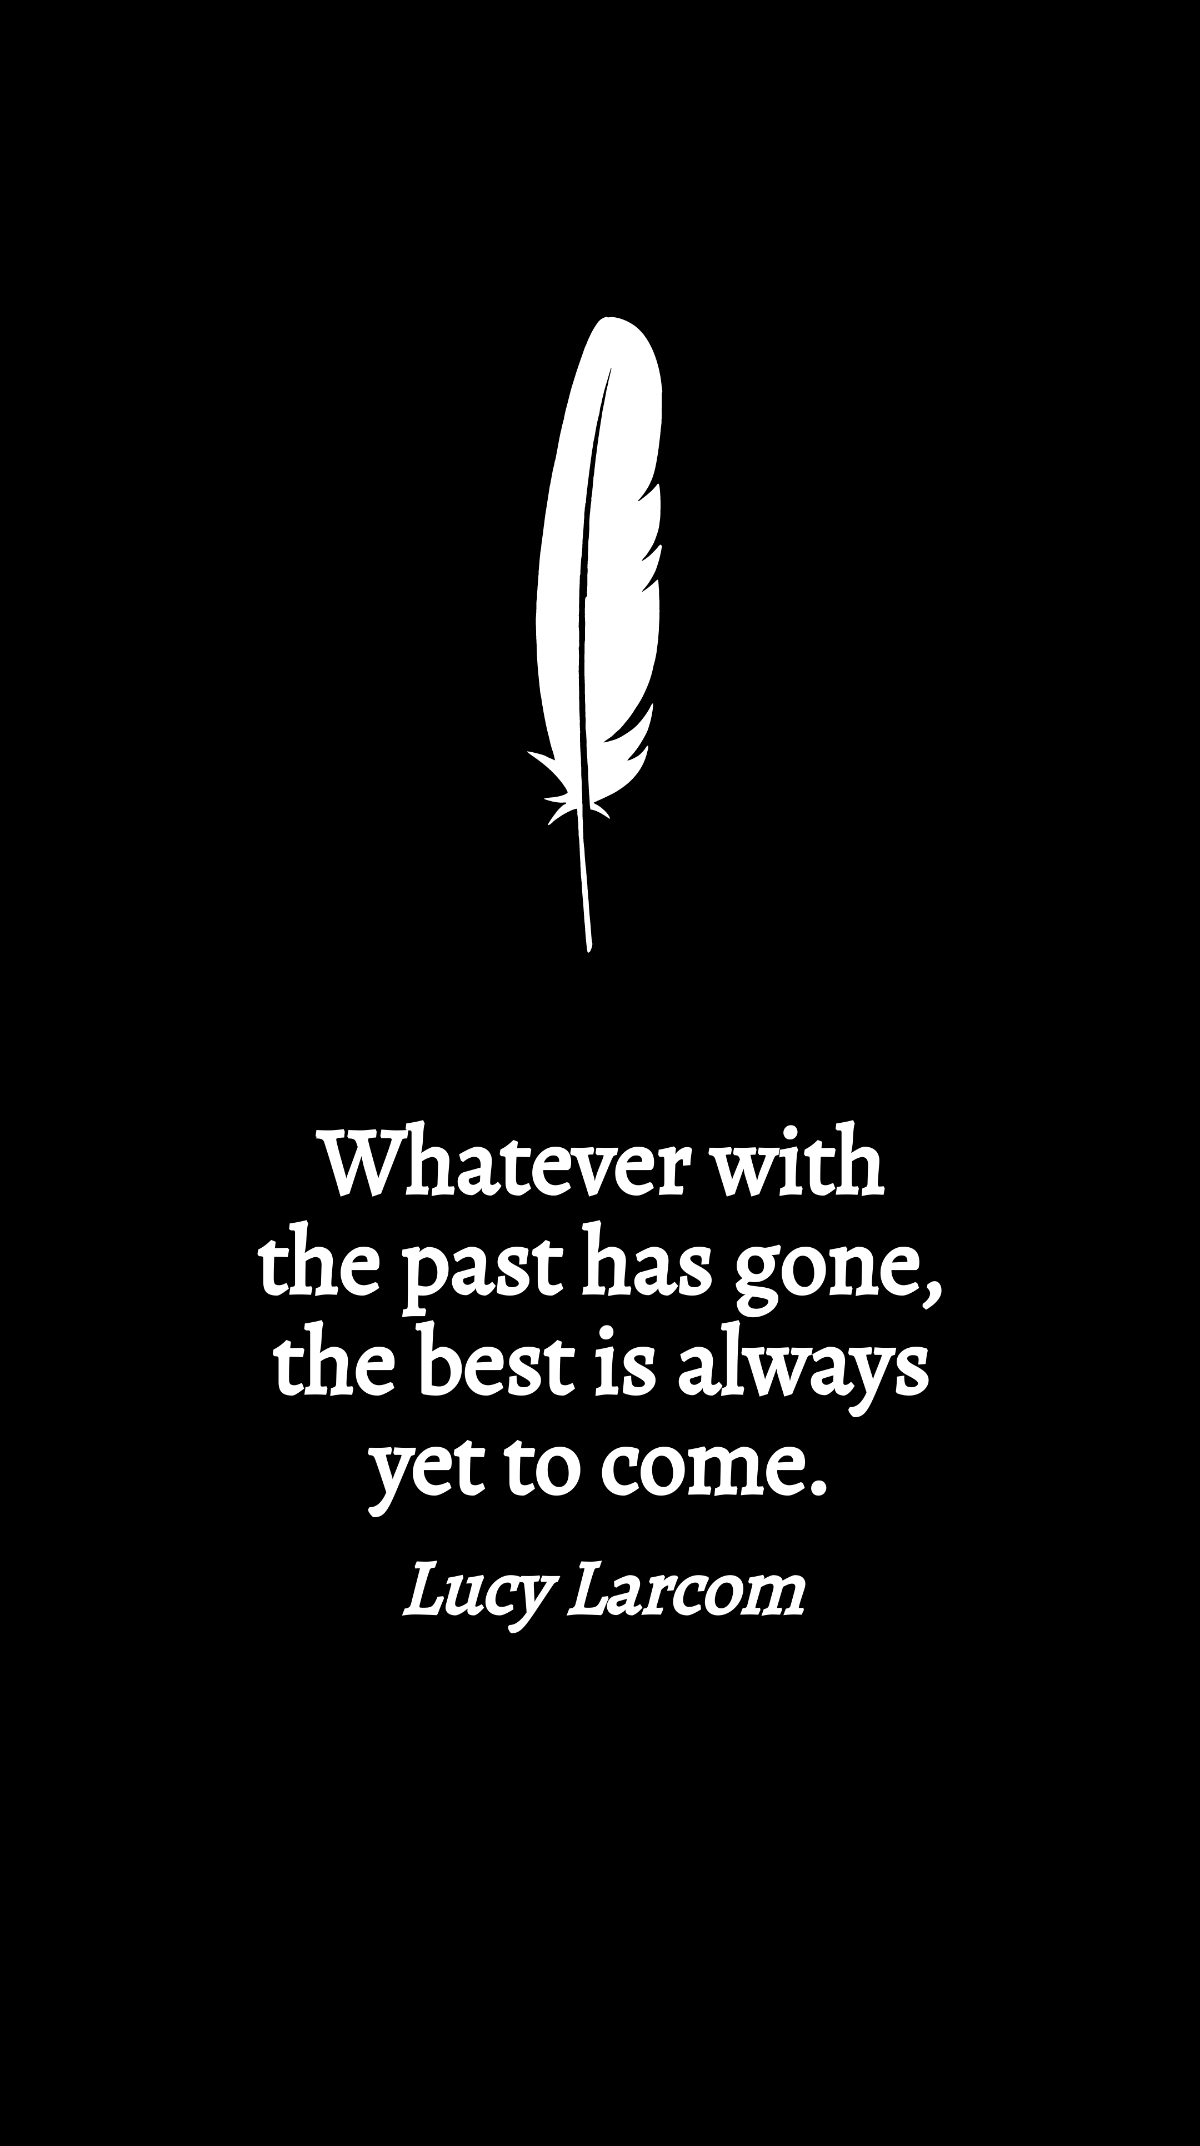 Lucy Larcom - Whatever with the past has gone, the best is always yet to come. Template